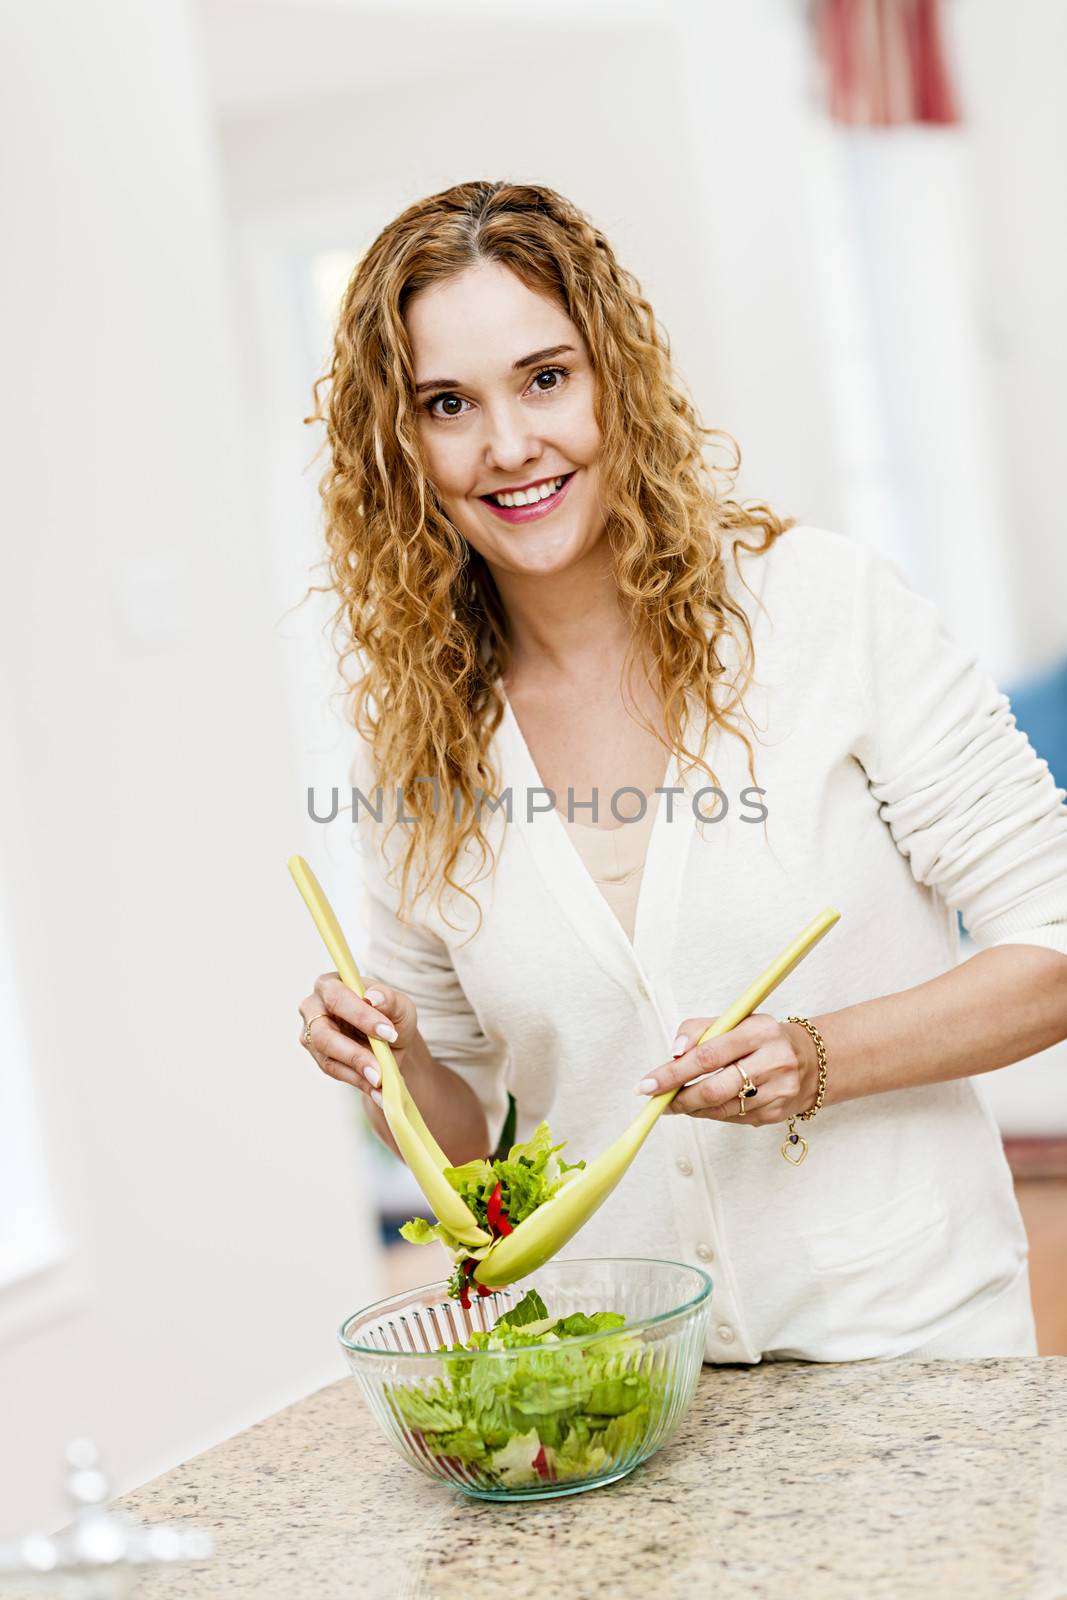 Smiling woman tossing salad in kitchen by elenathewise